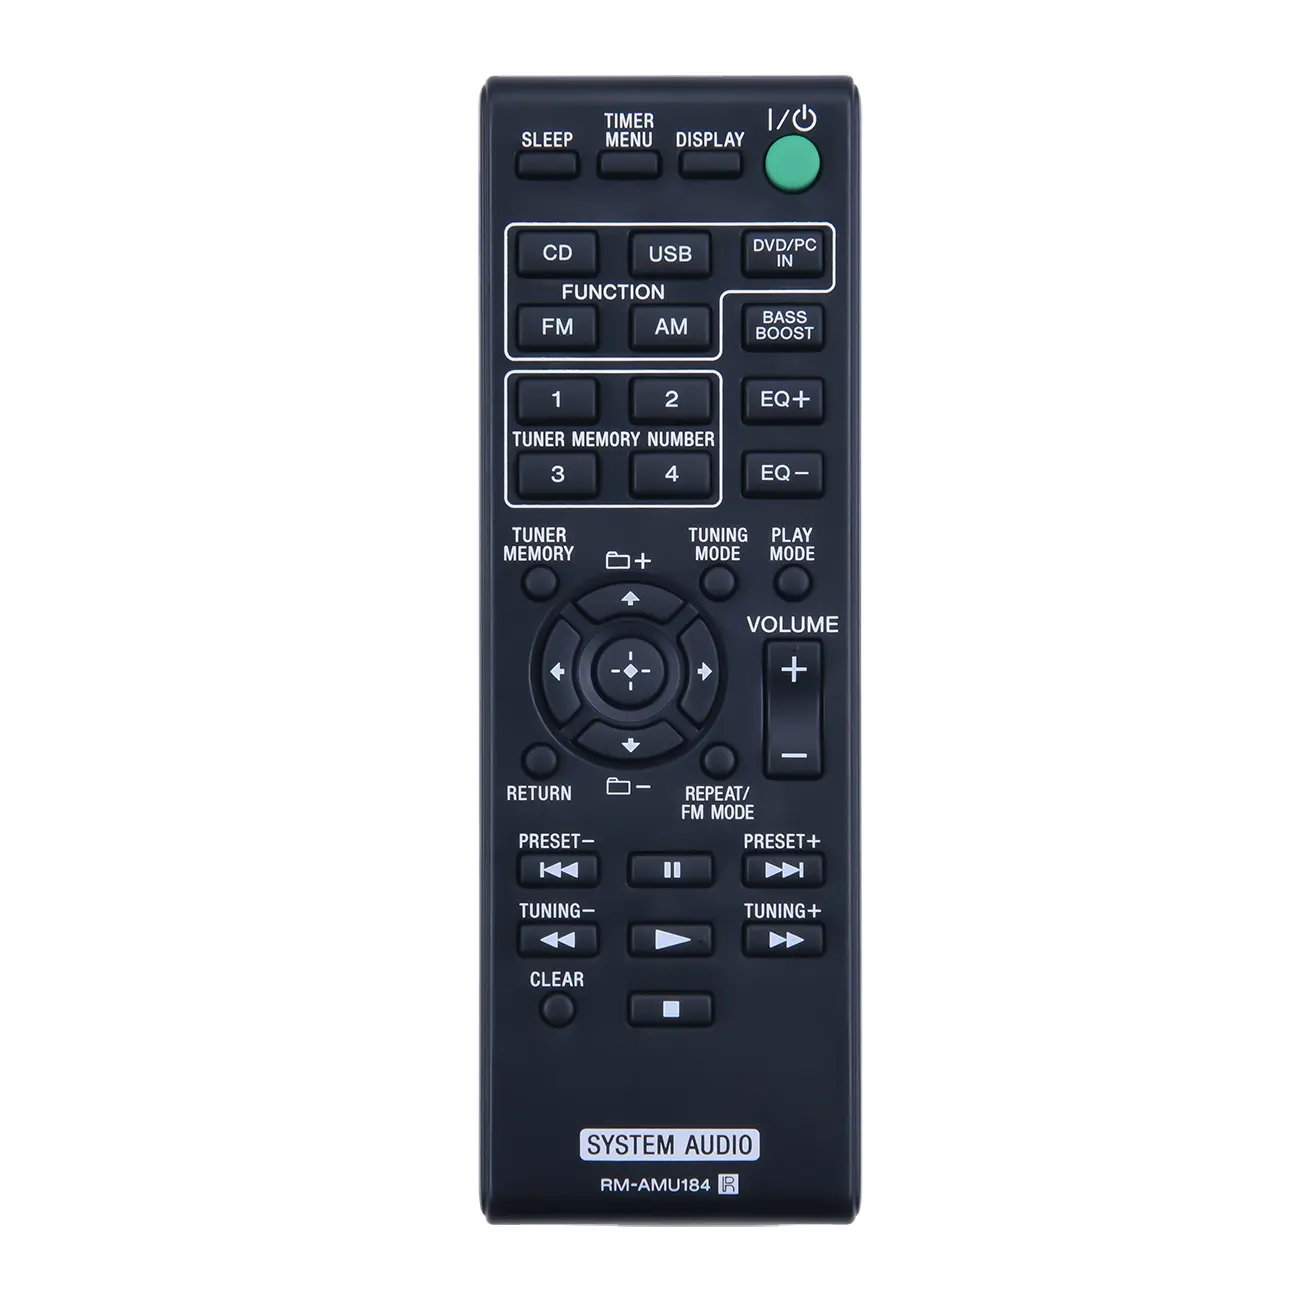 RM-AMU184 Replace Remote for Sony Mini Hi-Fi MHC-ECL5 SS-ECL5 HCD-ECL5 Mini Stereo Audio System